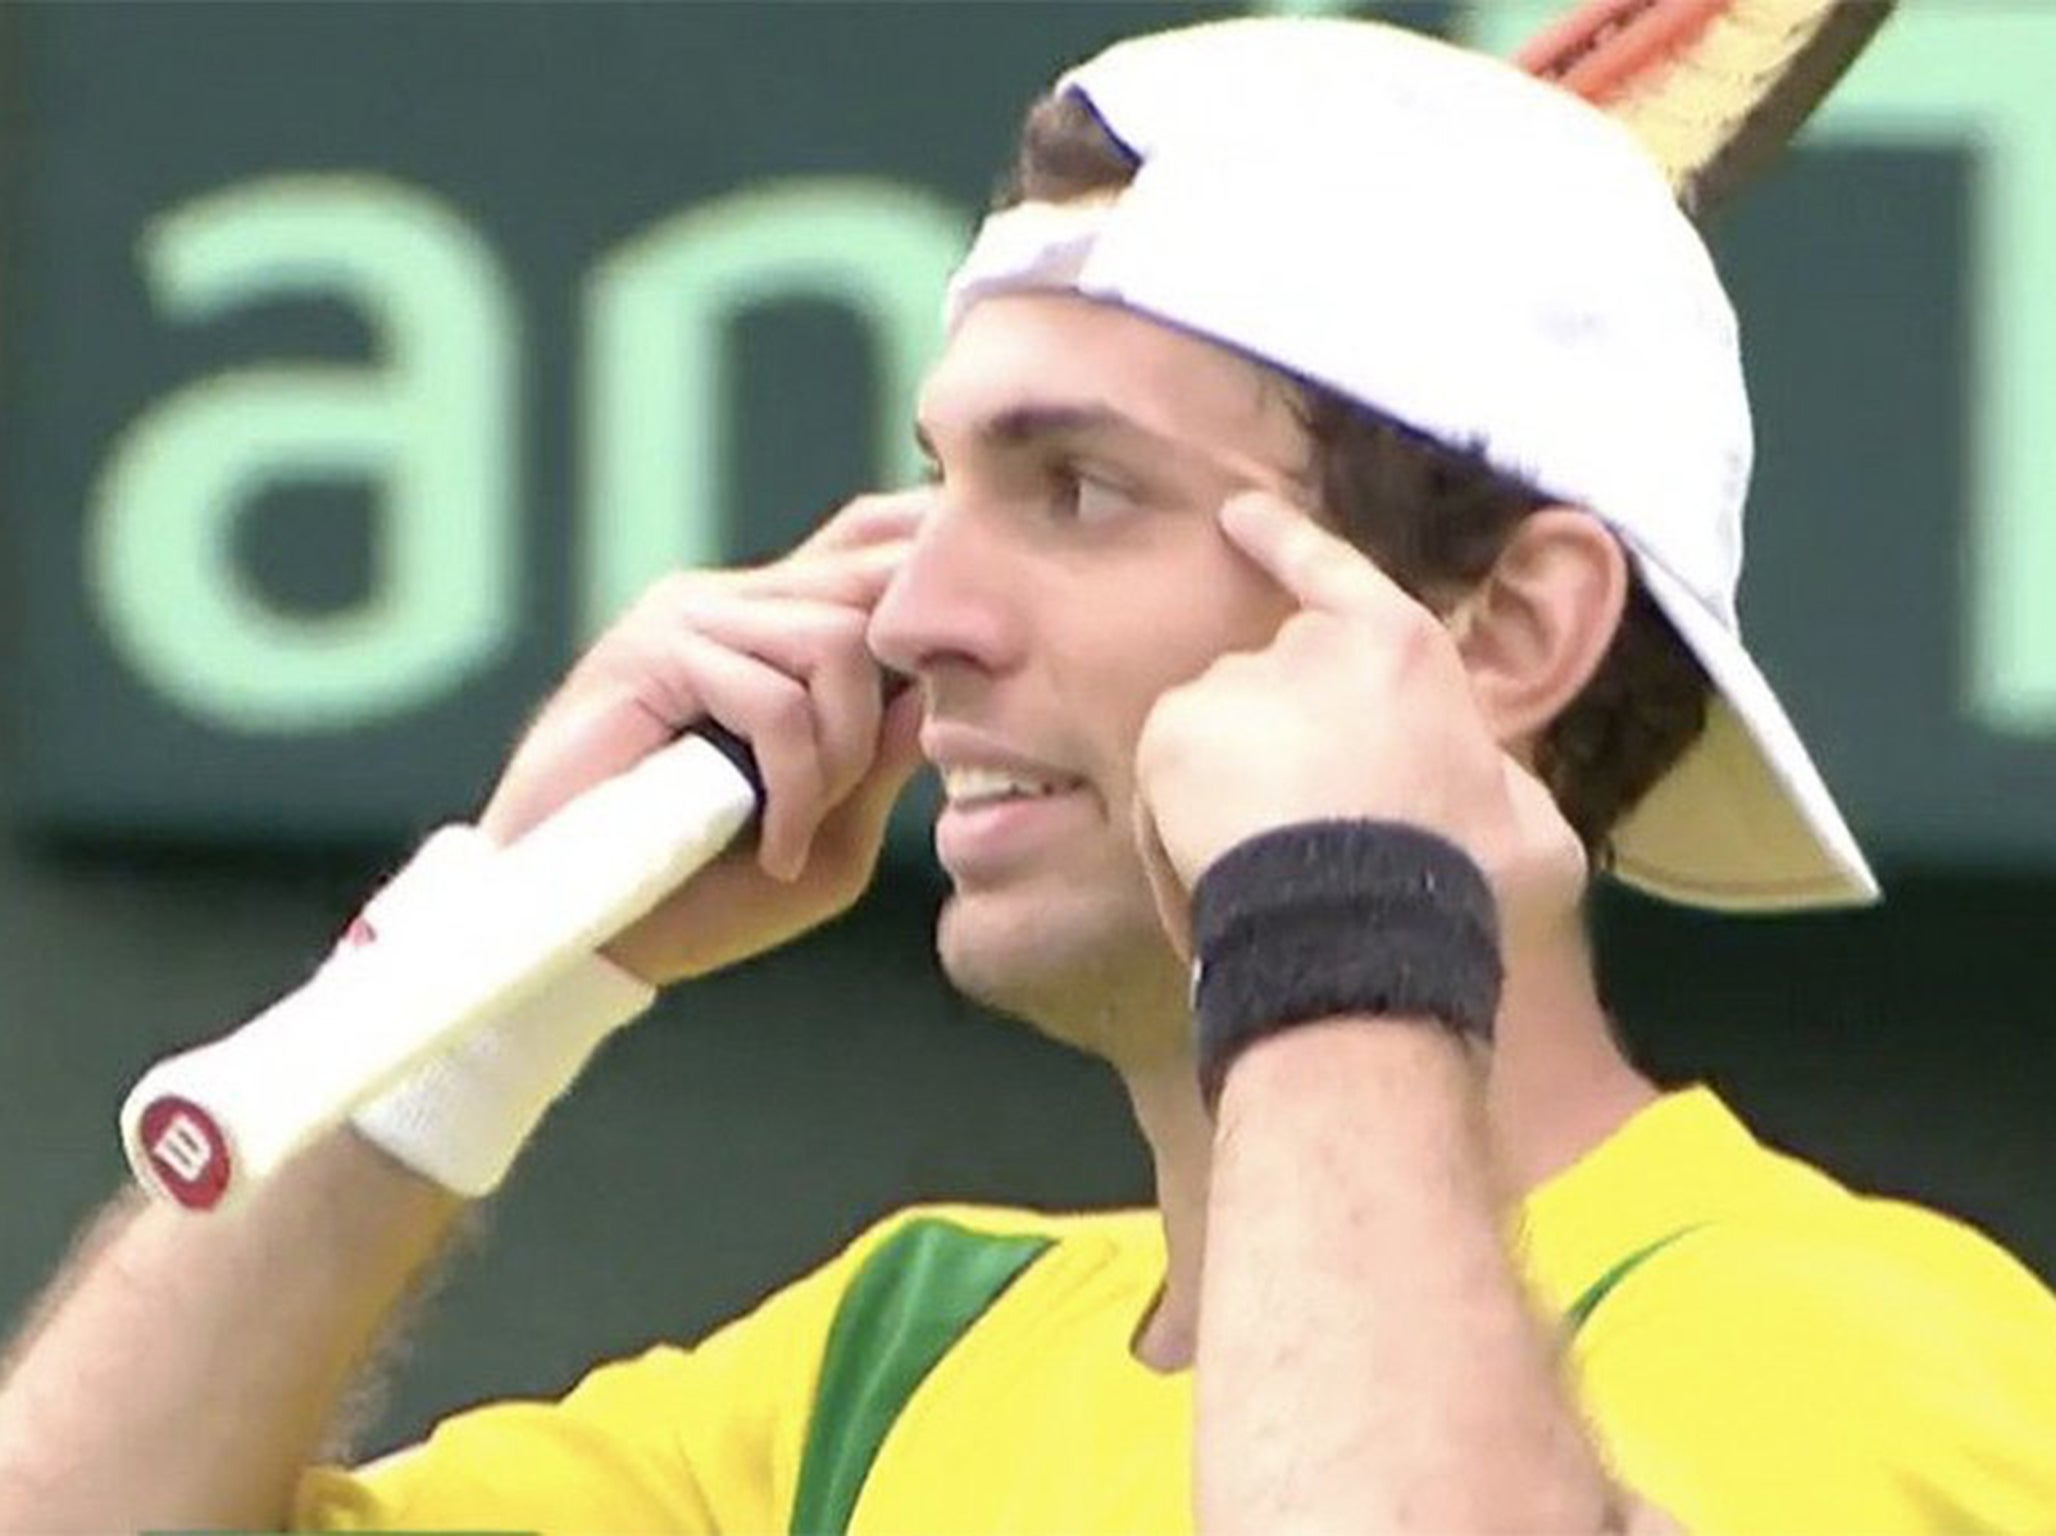 Brazilian tennis player fined for making an 'offensive' gesture